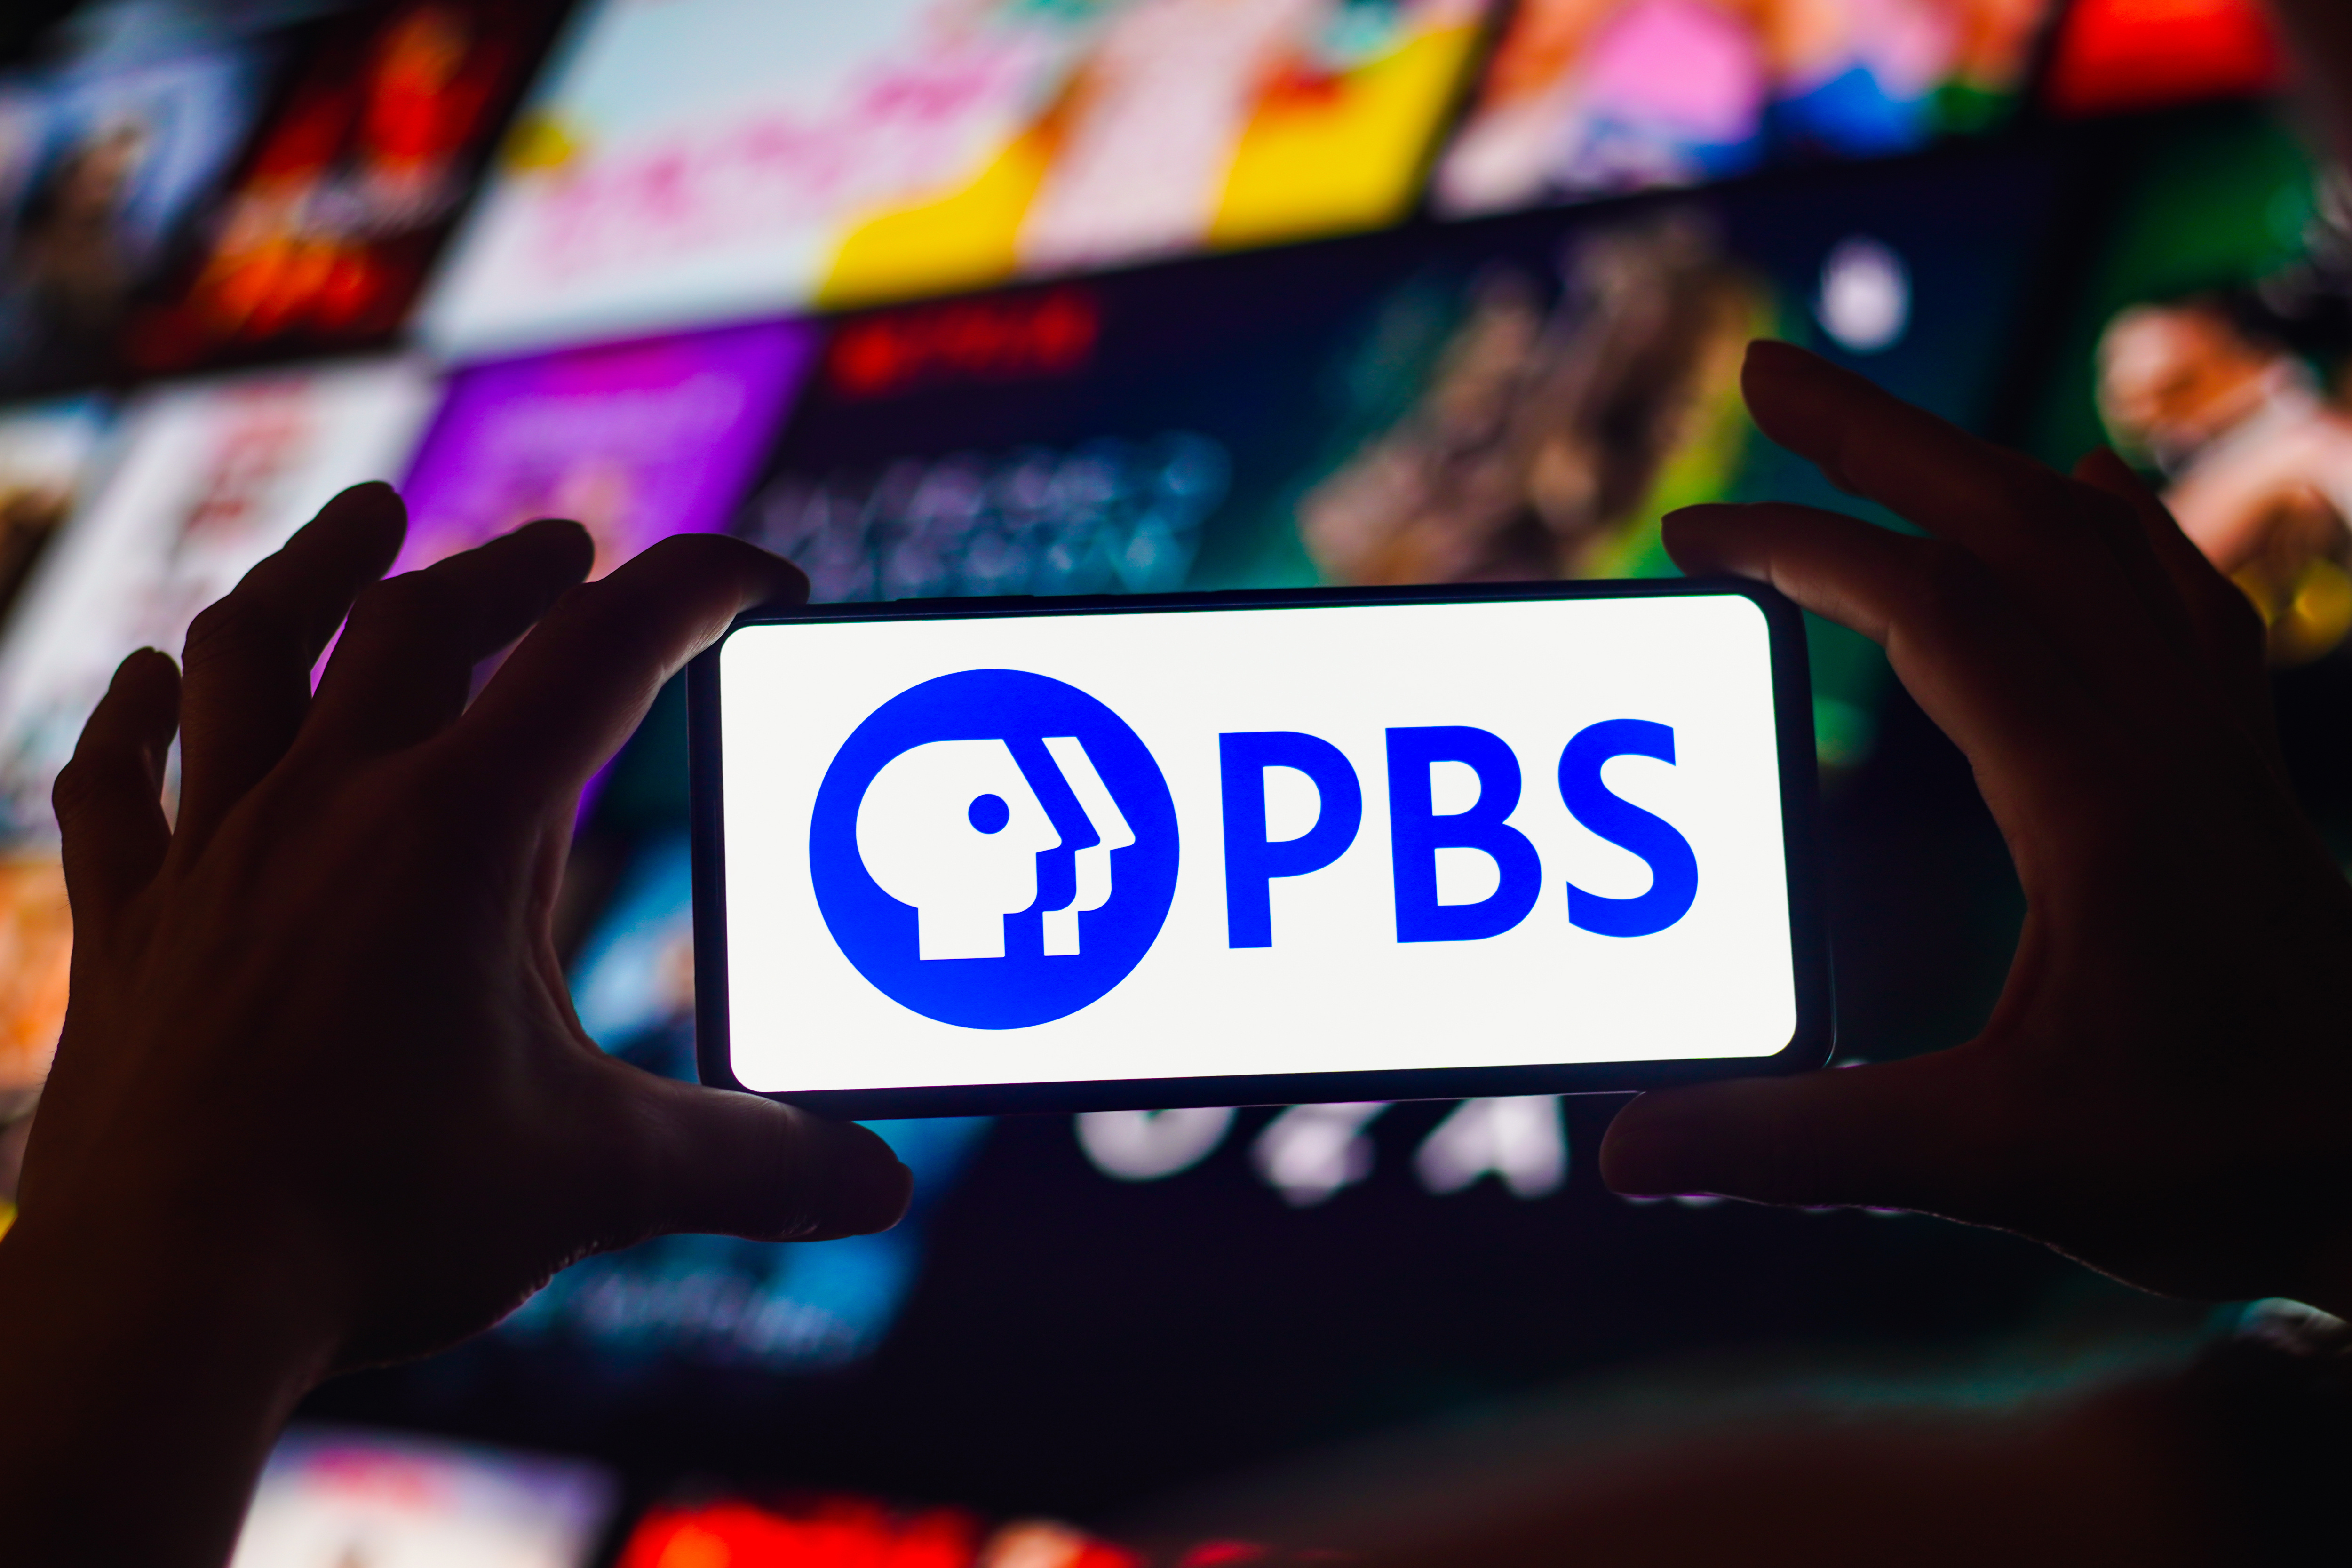 PBS also quit Twitter because of its 'government-funded media' label.